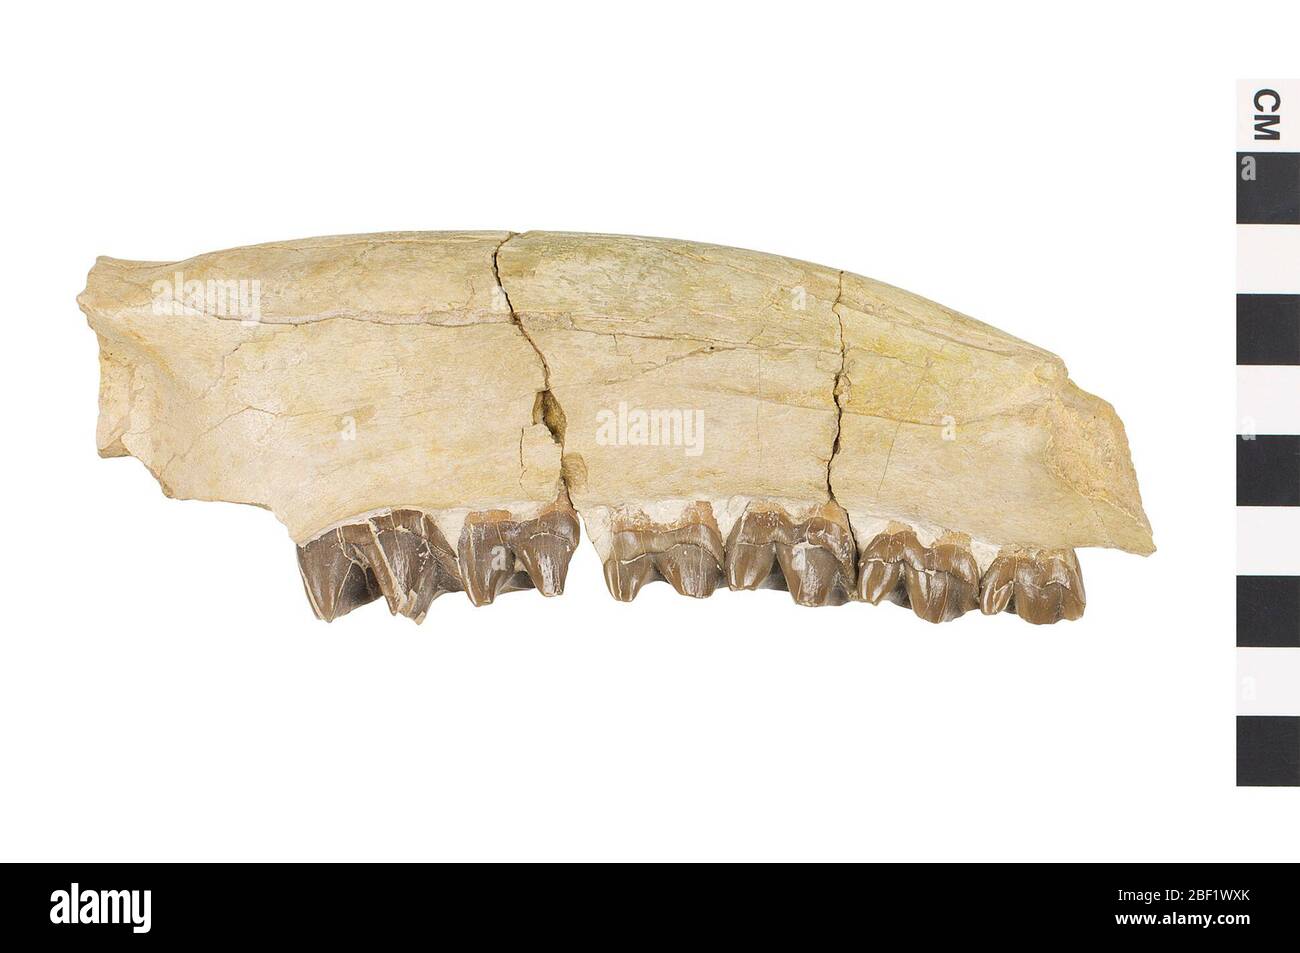 Running Rhinoceros. This object is part of the Education and Outreach collection, some of which are in the Q?rius science education center and available to see.Cenozoic - Paleogene - Oligocene114 Jan 2020Chadron-Brule Stock Photo